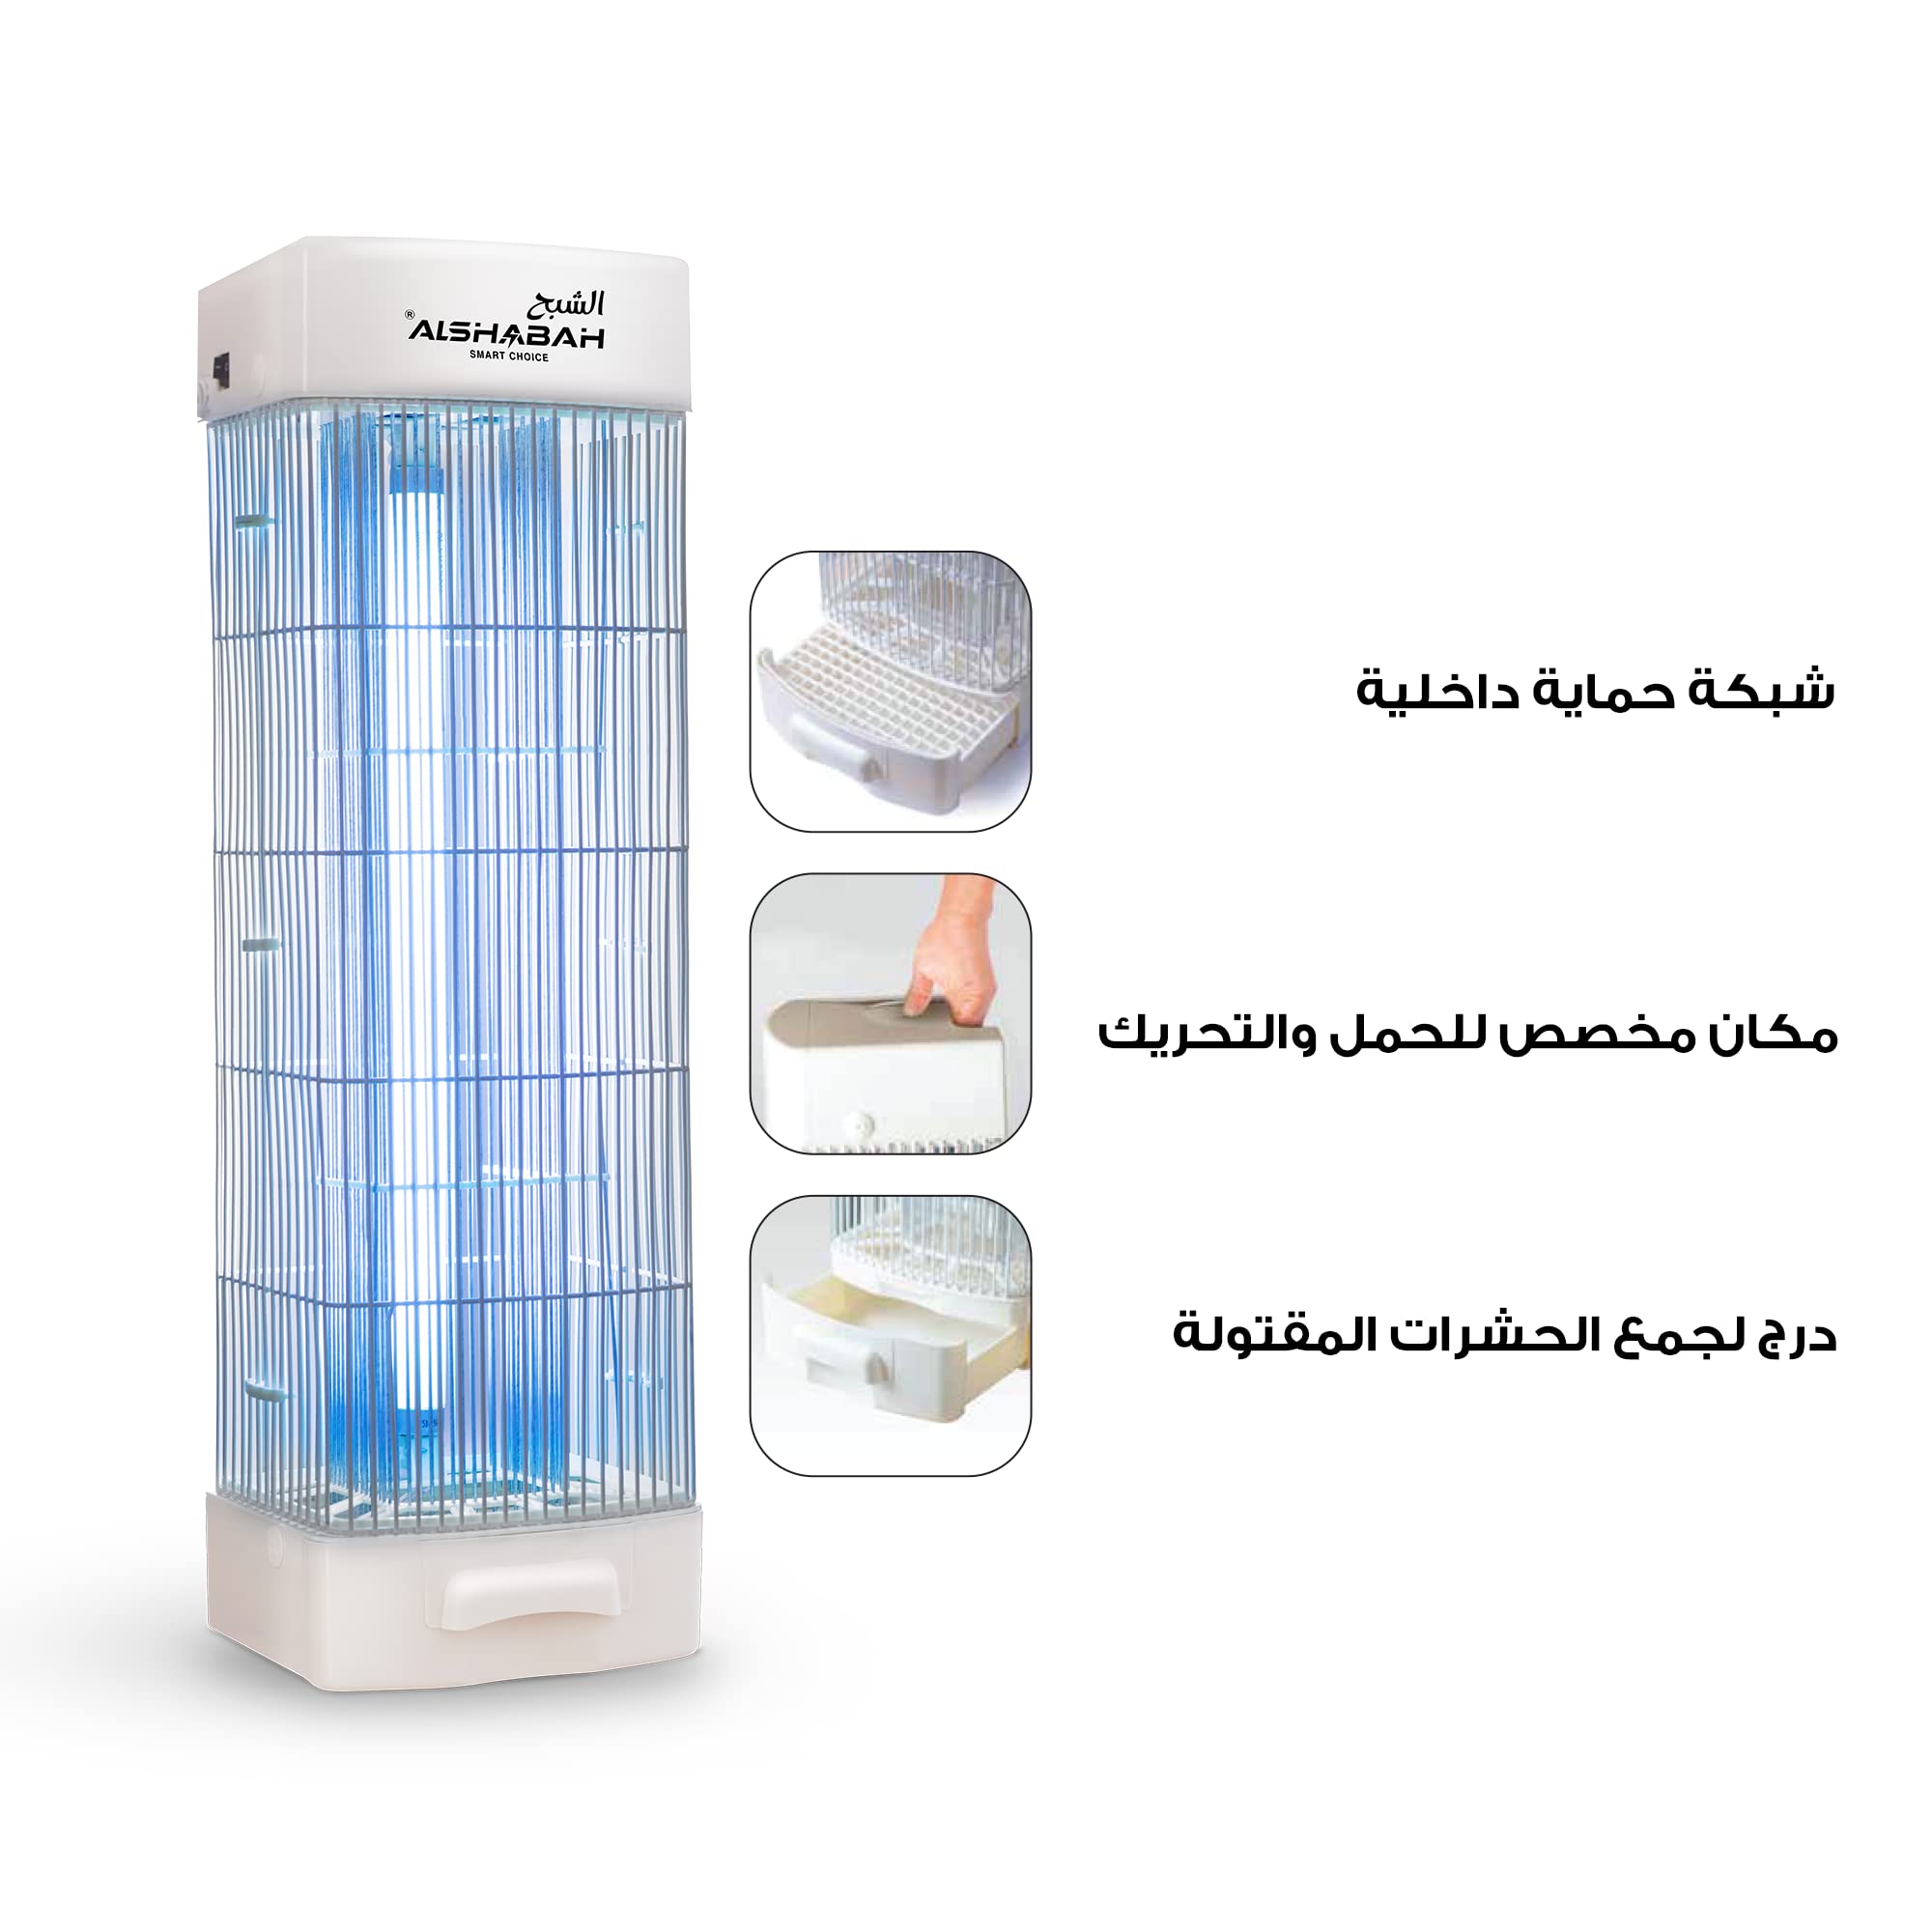 AL SHABAH flying insects killer - the best bugg zapper - Mosquitos & flys trap-indoor & outdoor use - kills flying Insects